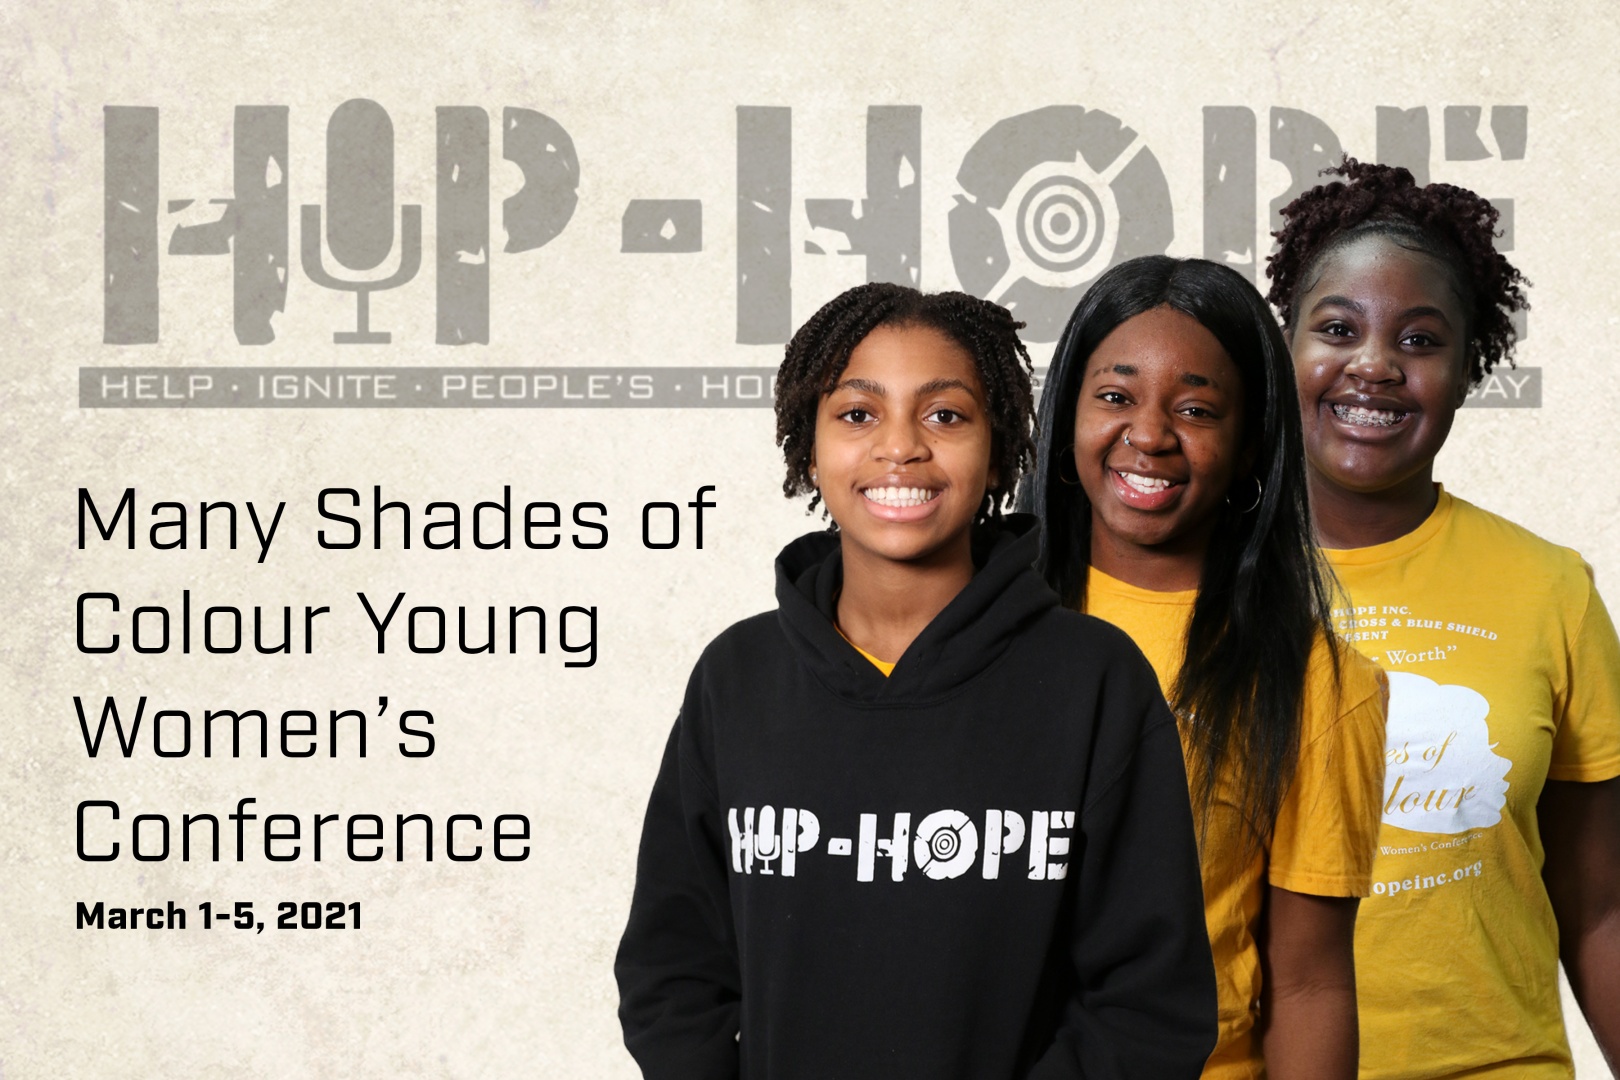 Many Shades of Colour Young Women’s Conference